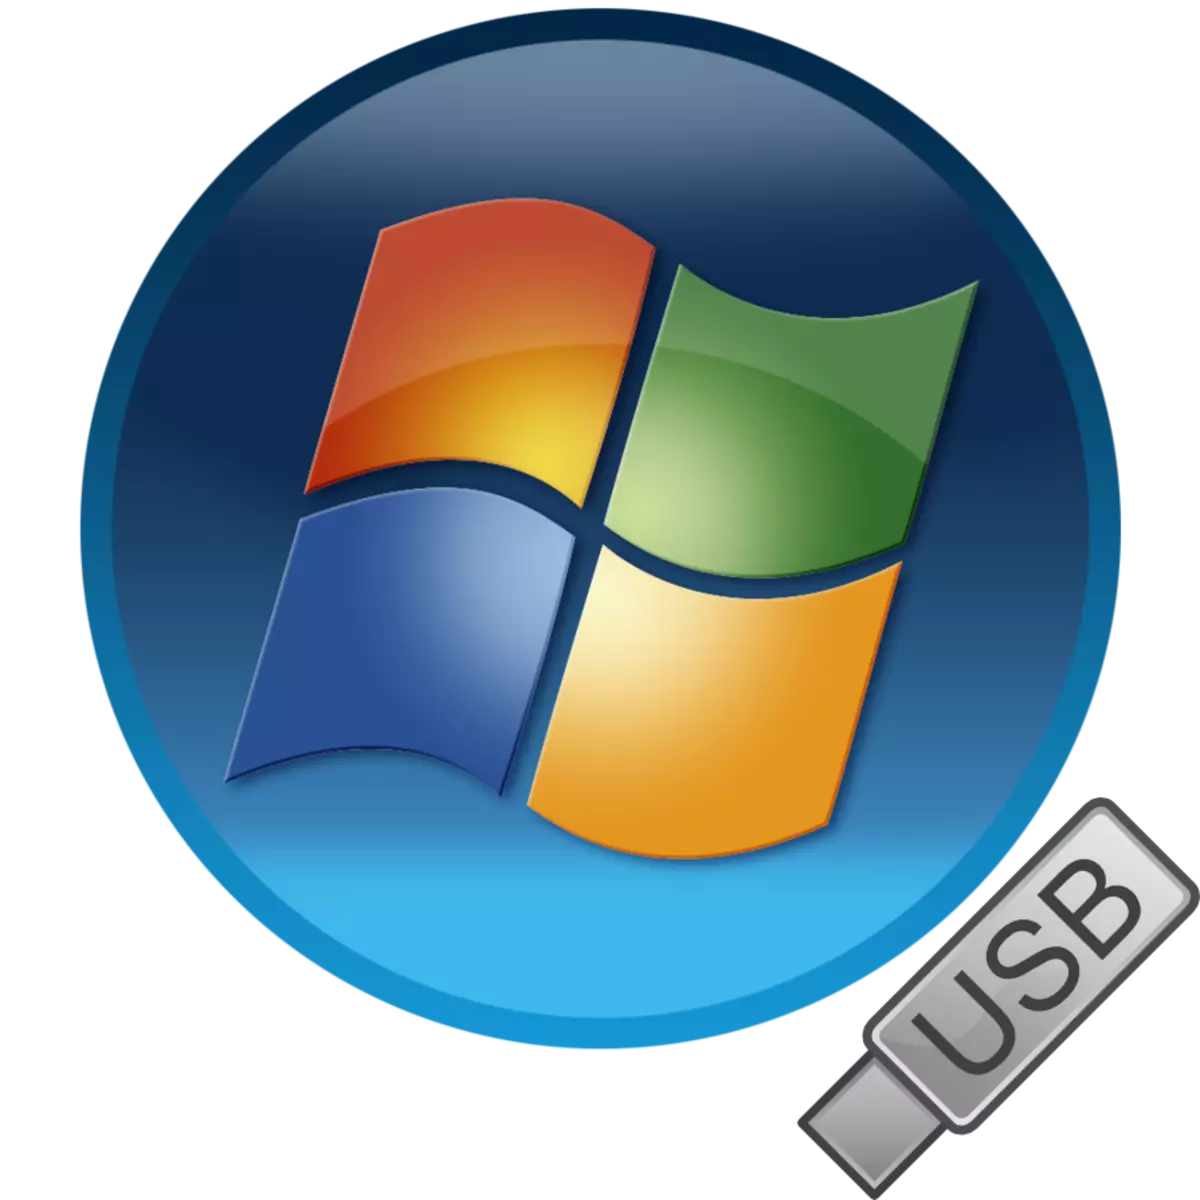 Boot flash drive with windows 7